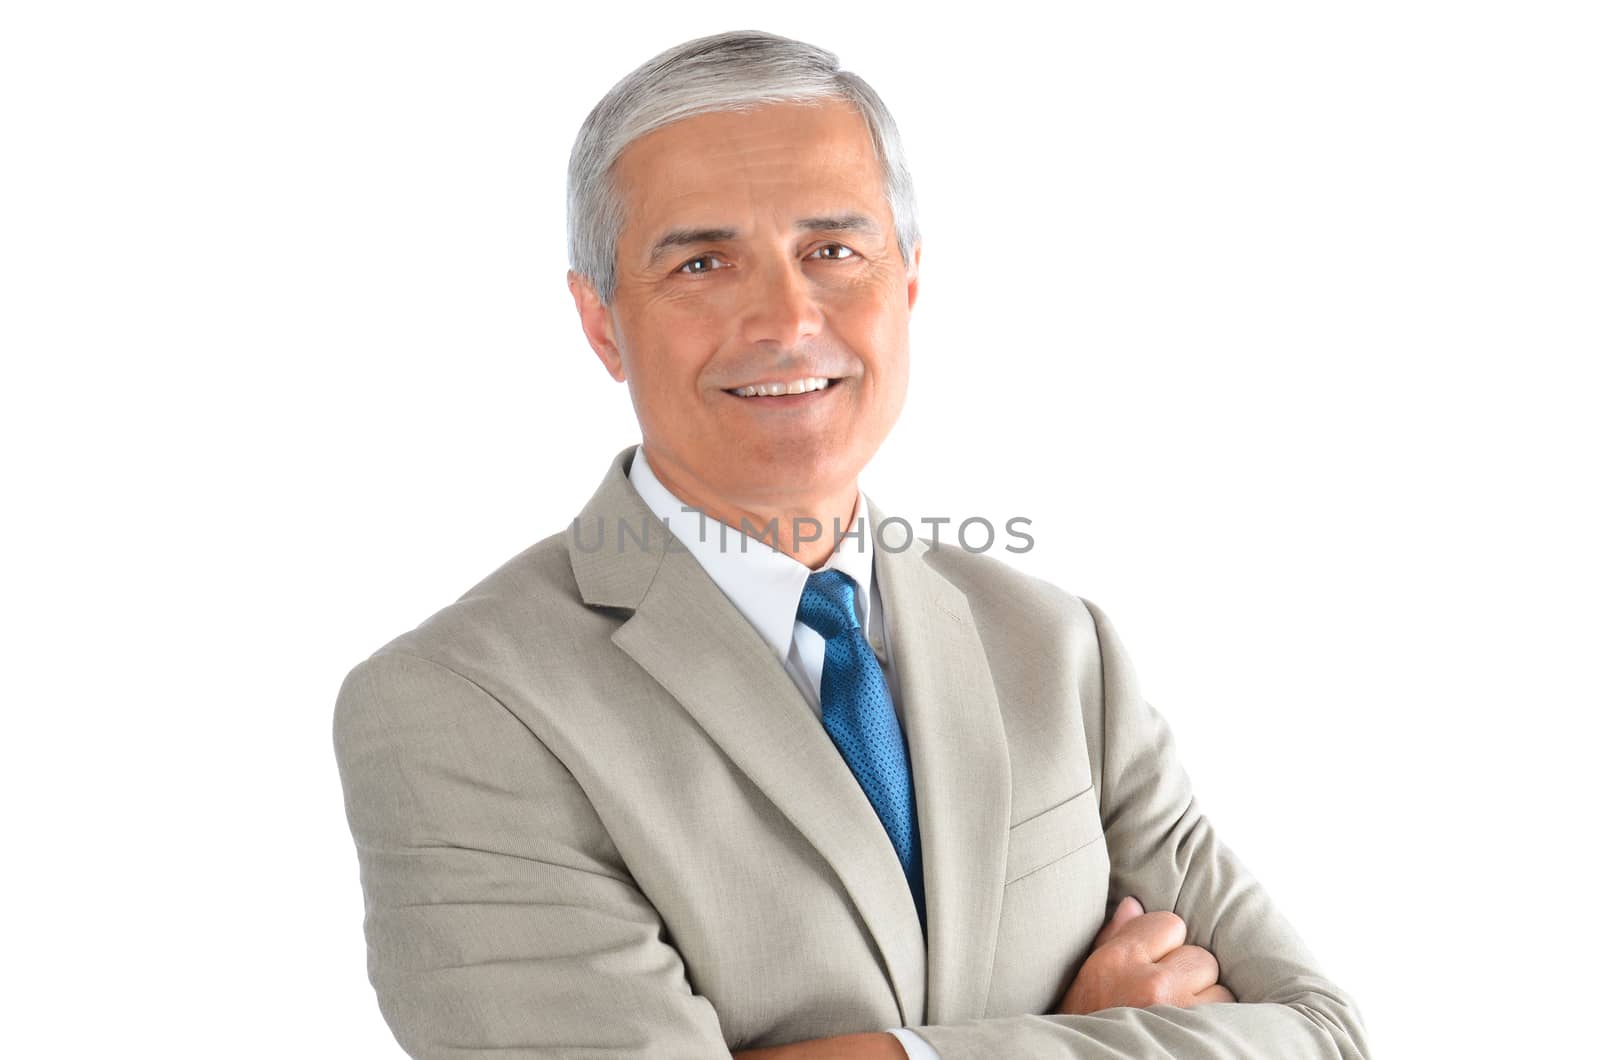 Portrait of a smiling middle aged businessman wearing a light tan suit with a blue necktie and his arms crossed. Horizontal over a white background.